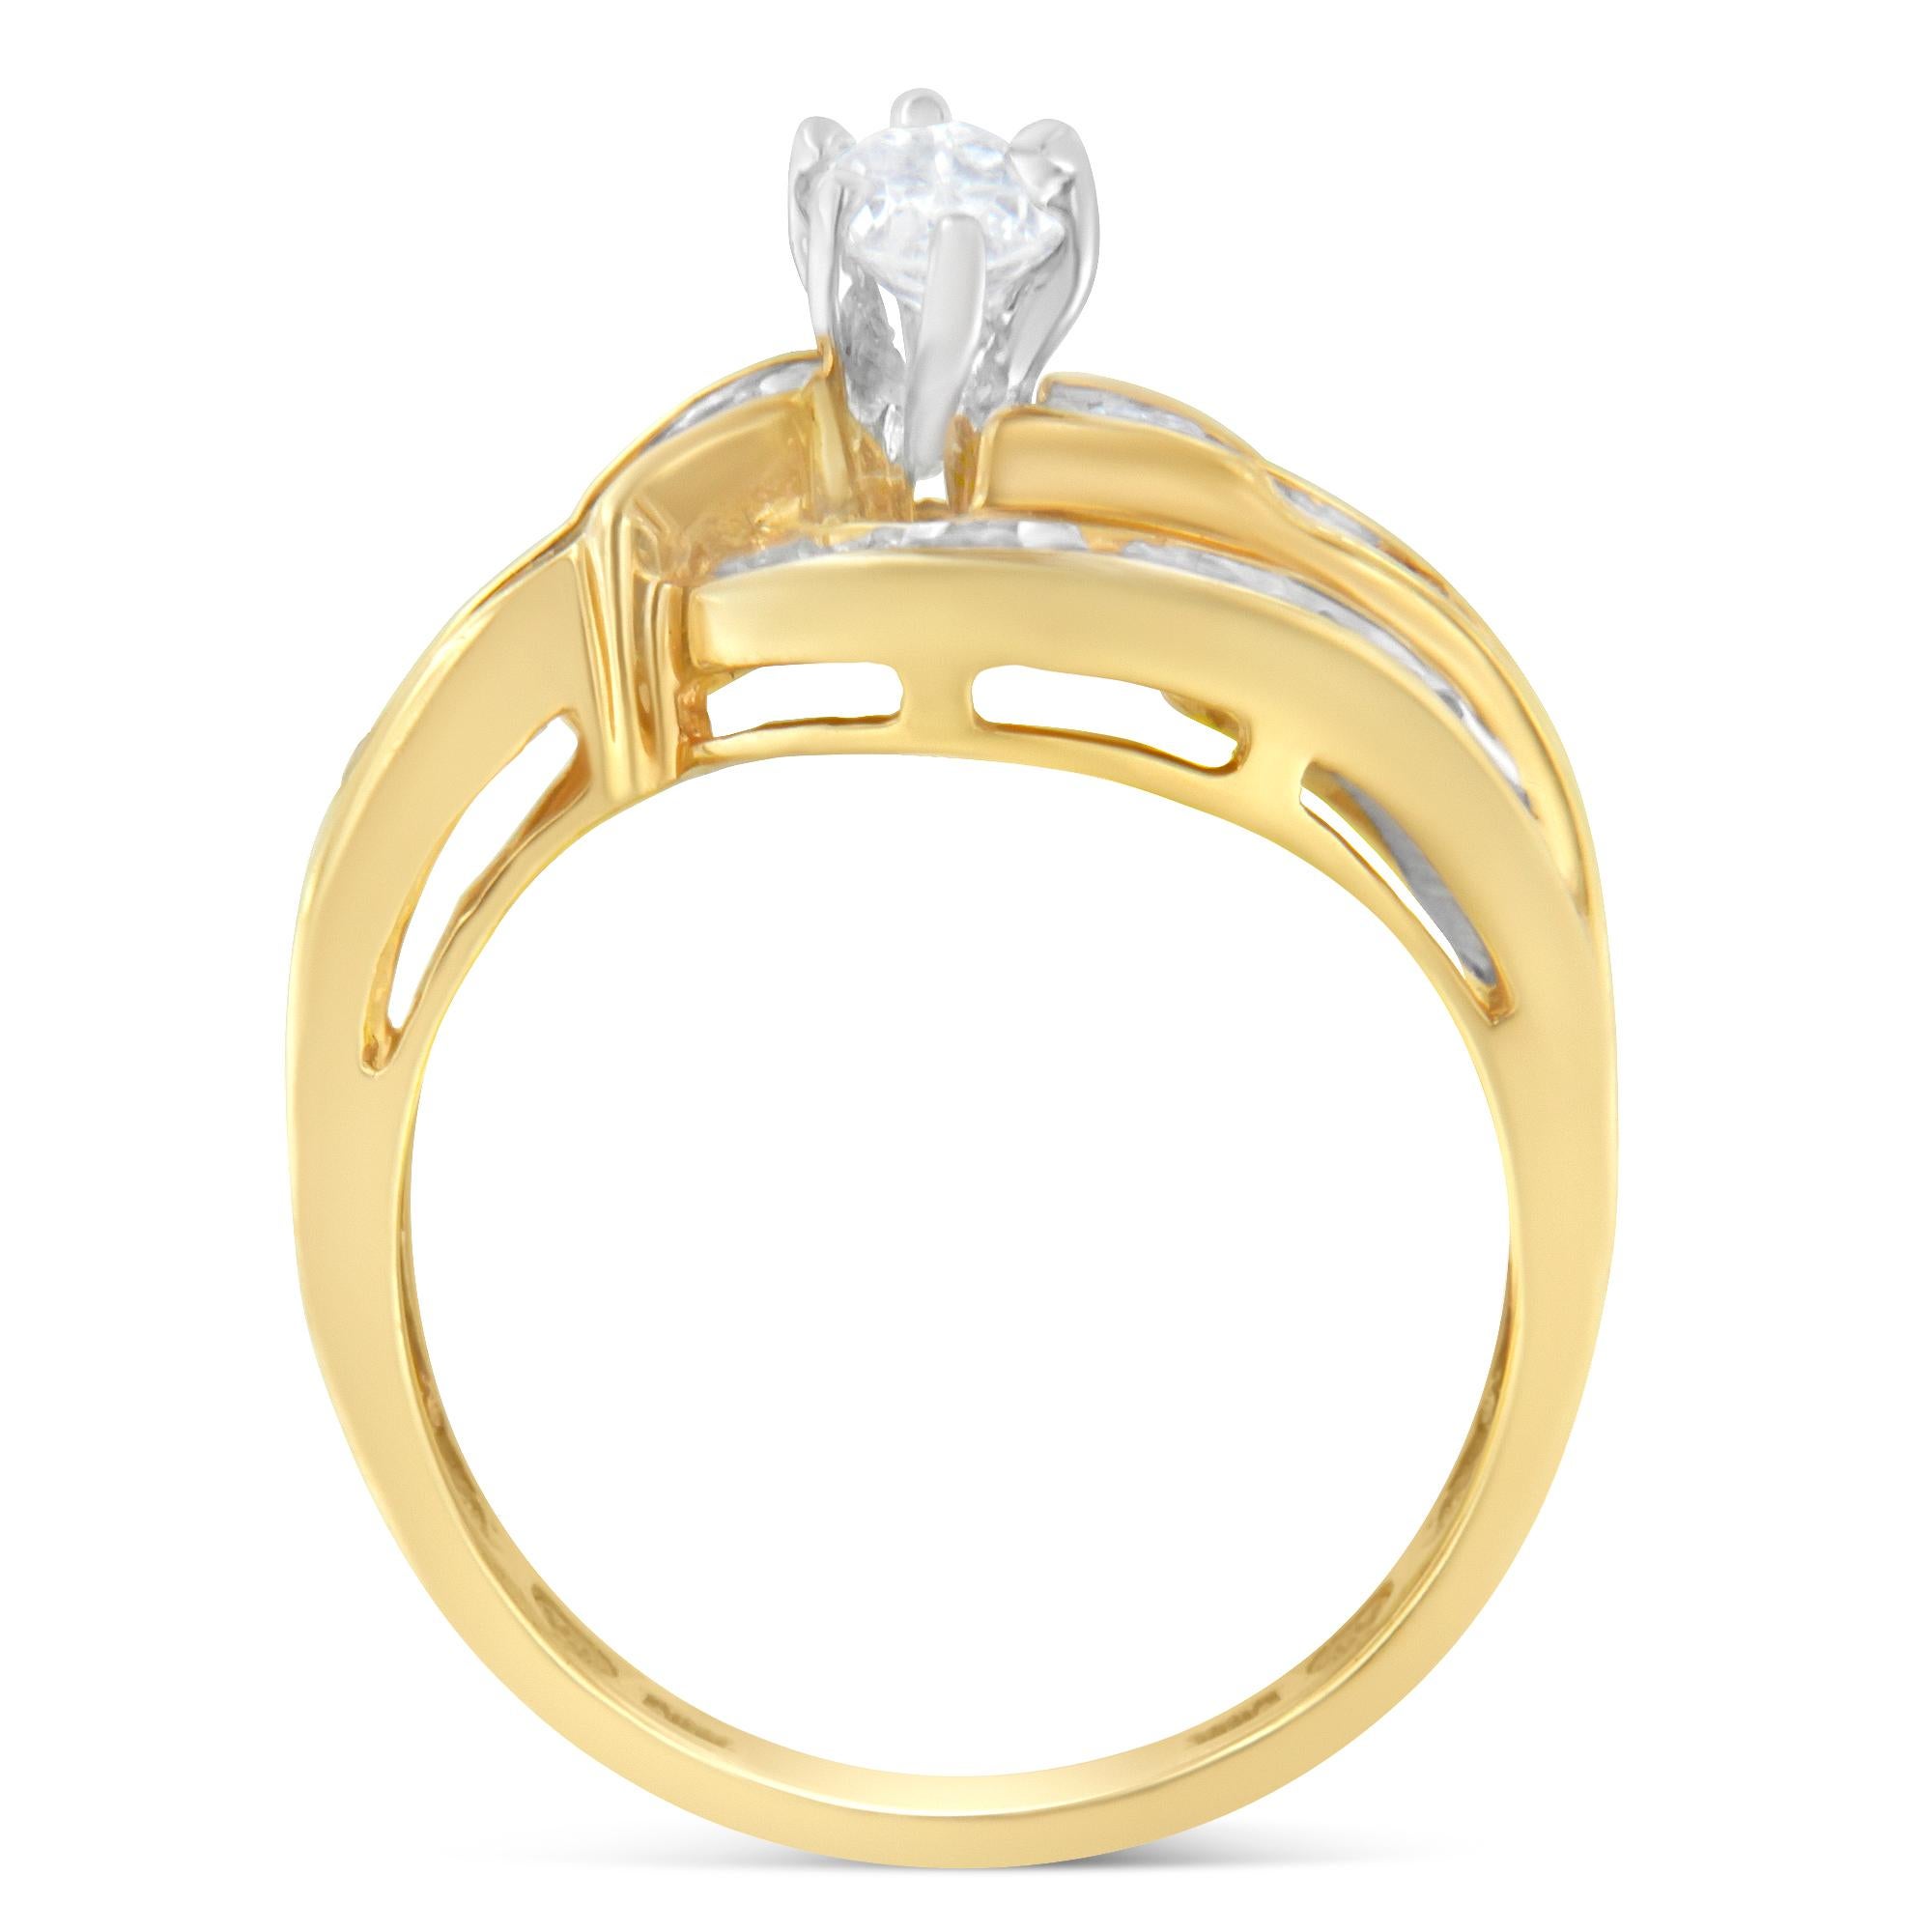 A central marquise cut diamond is the main feature of this elegant design that also features a bypass band crafted in 14 karat yellow gold and set with diamond baguettes and round diamonds. It has a total diamond weight of 1 carat.

